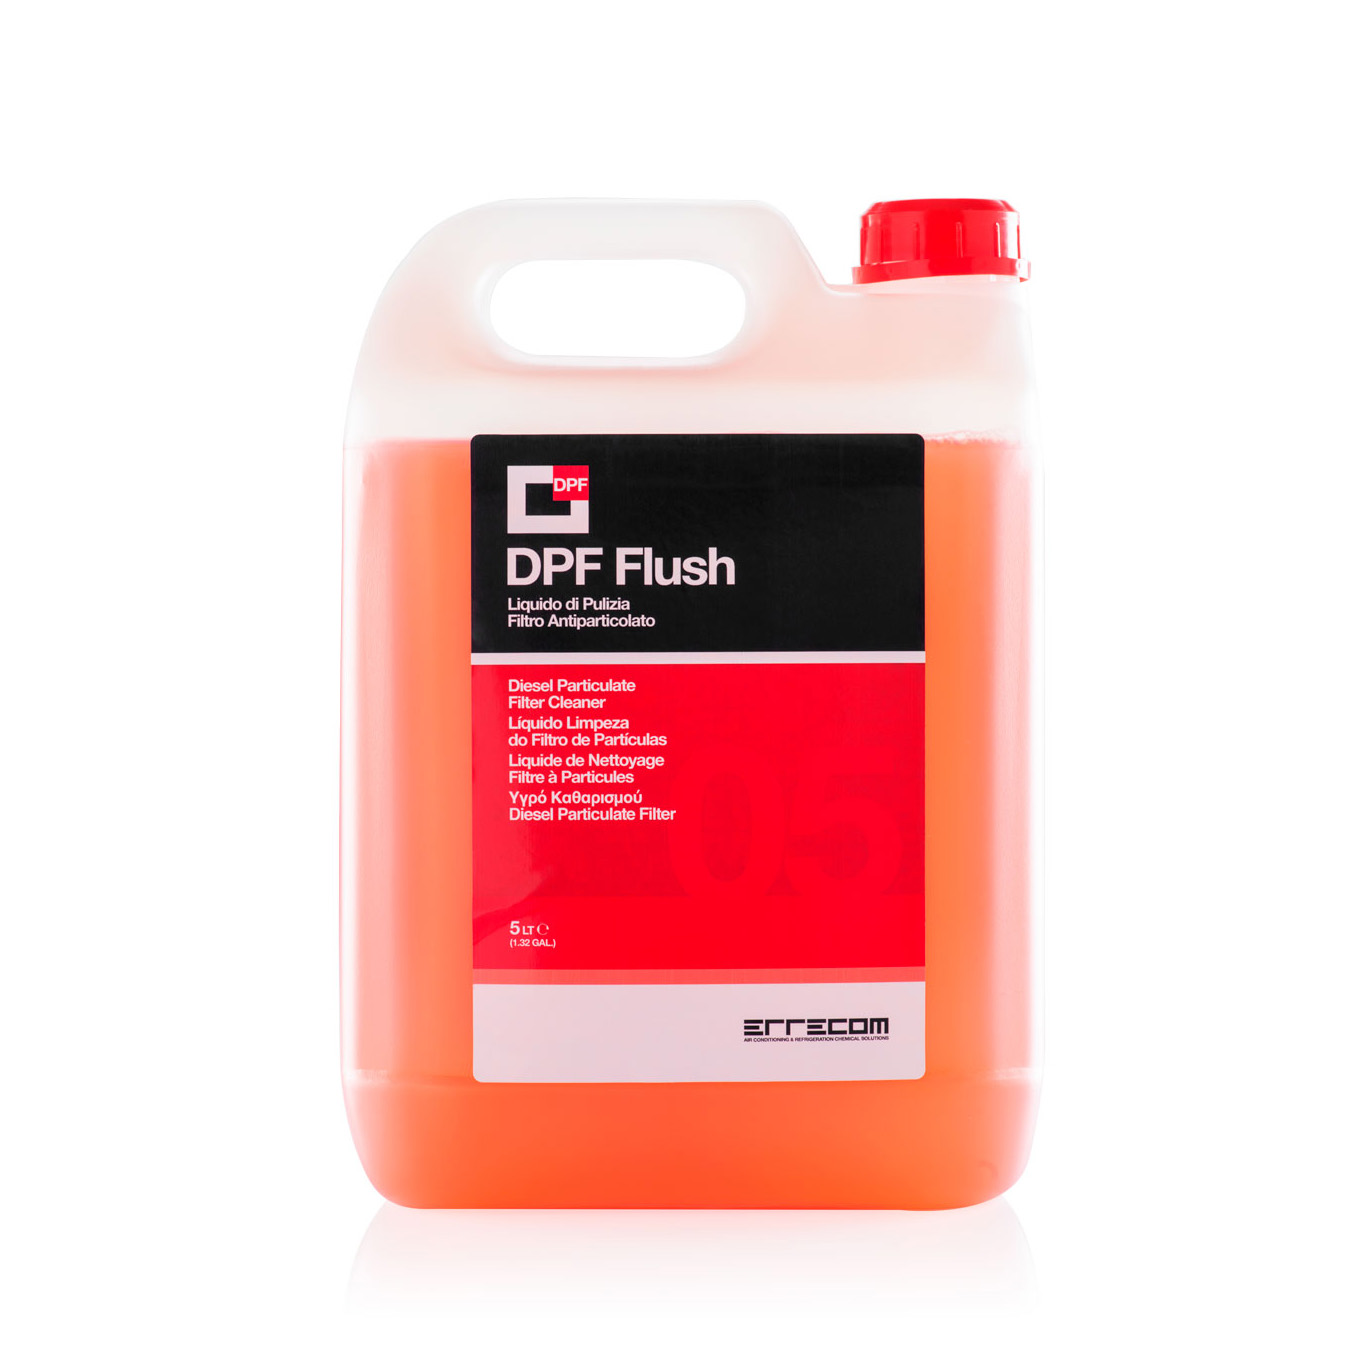 2 x DPF FLUSH - Liquid for the Cleaning of Diesel Particulate Filters - 5 liters - Package # 2 pcs.